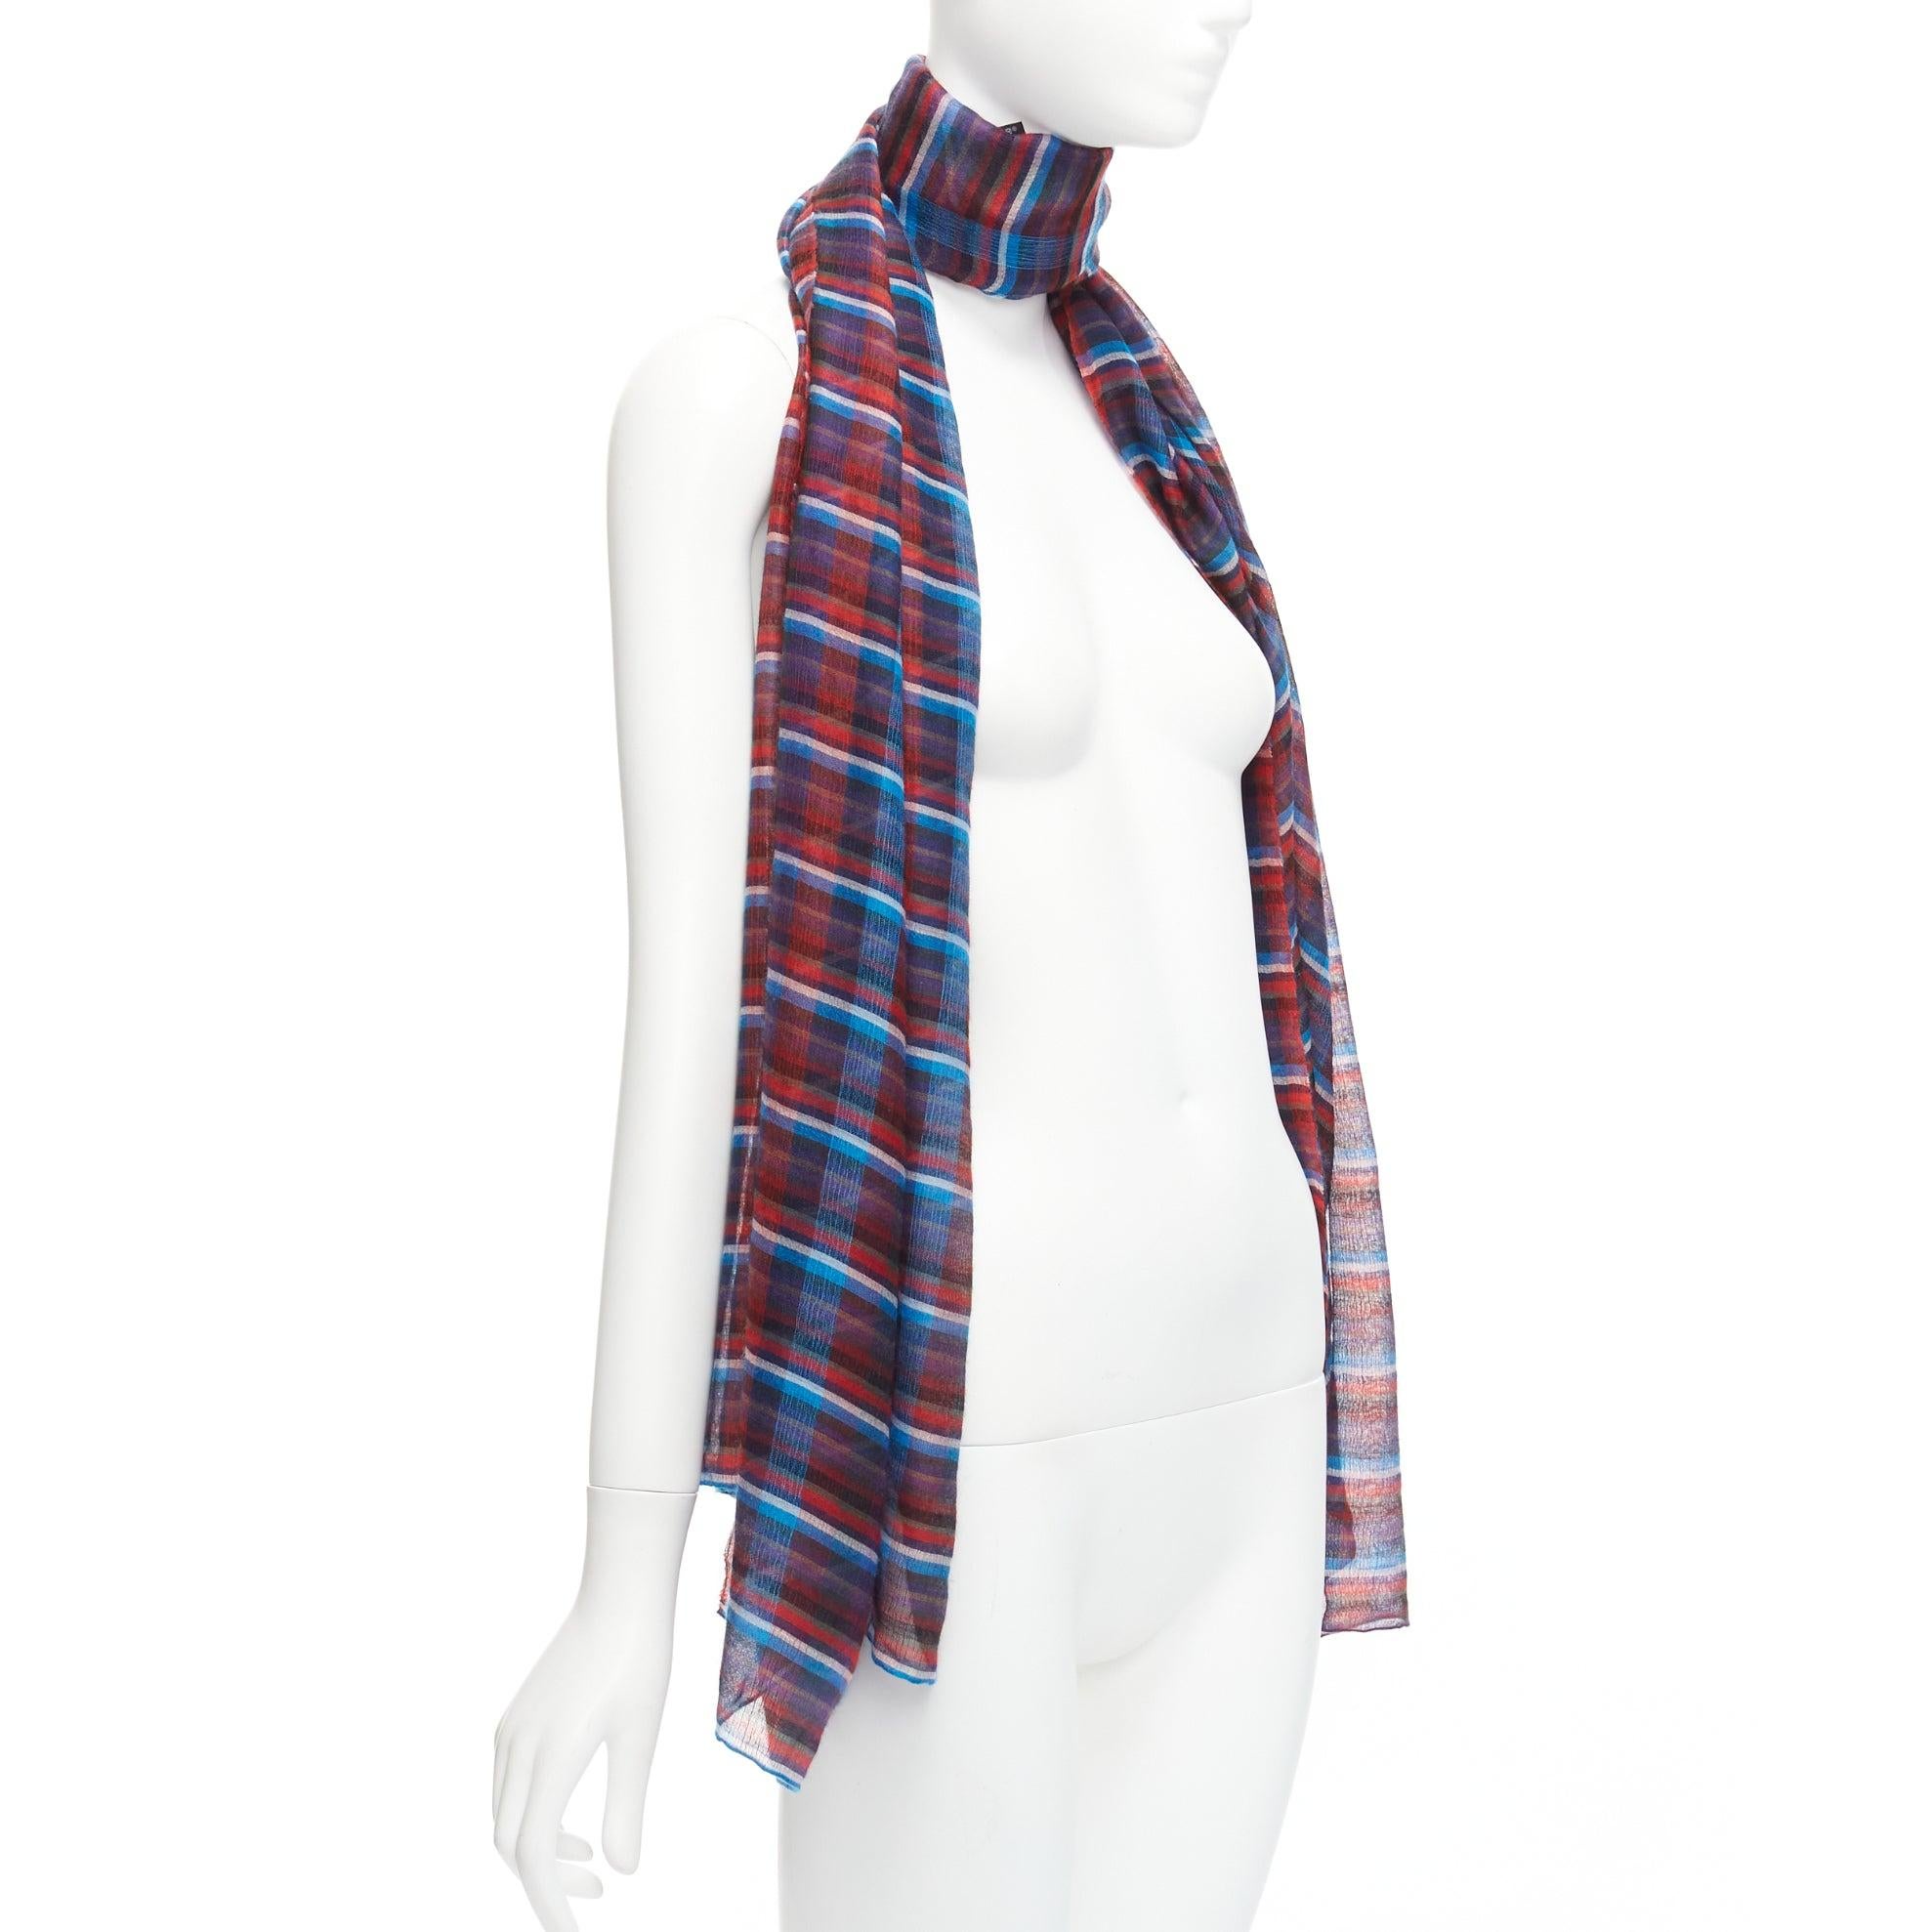 HERMES blue red checkered cashmere silk long wrap rectangular scarf
Reference: AAWC/A00836
Brand: Hermes
Material: Cashmere, Silk
Color: Blue, Red
Pattern: Checkered
Made in: Nepal

CONDITION:
Condition: Excellent, this item was pre-owned and is in